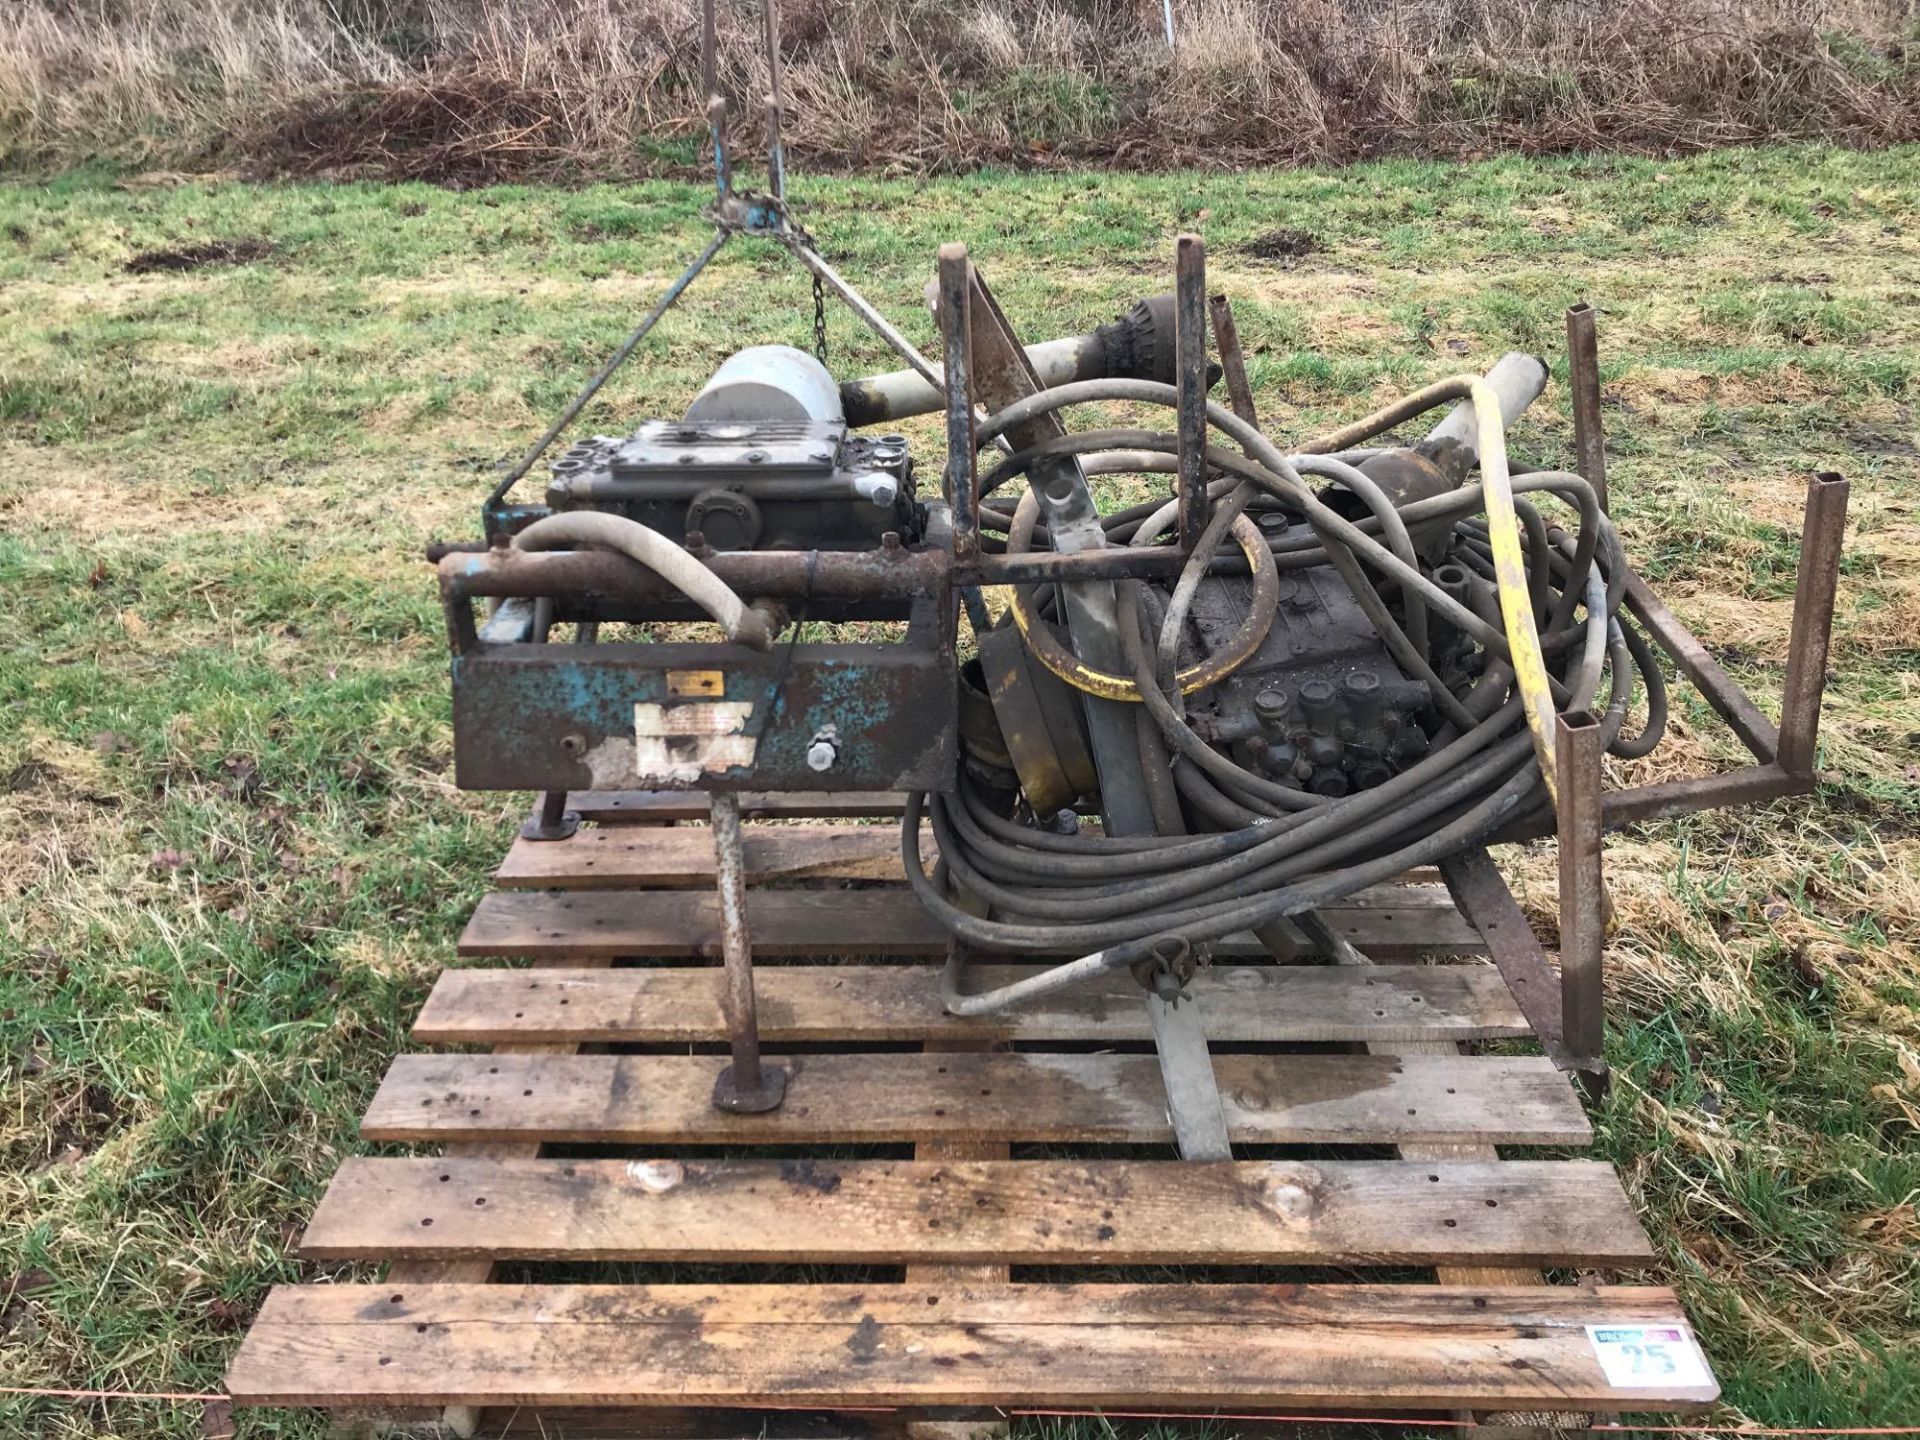 PTO driven pressure washer (for spares or repairs)